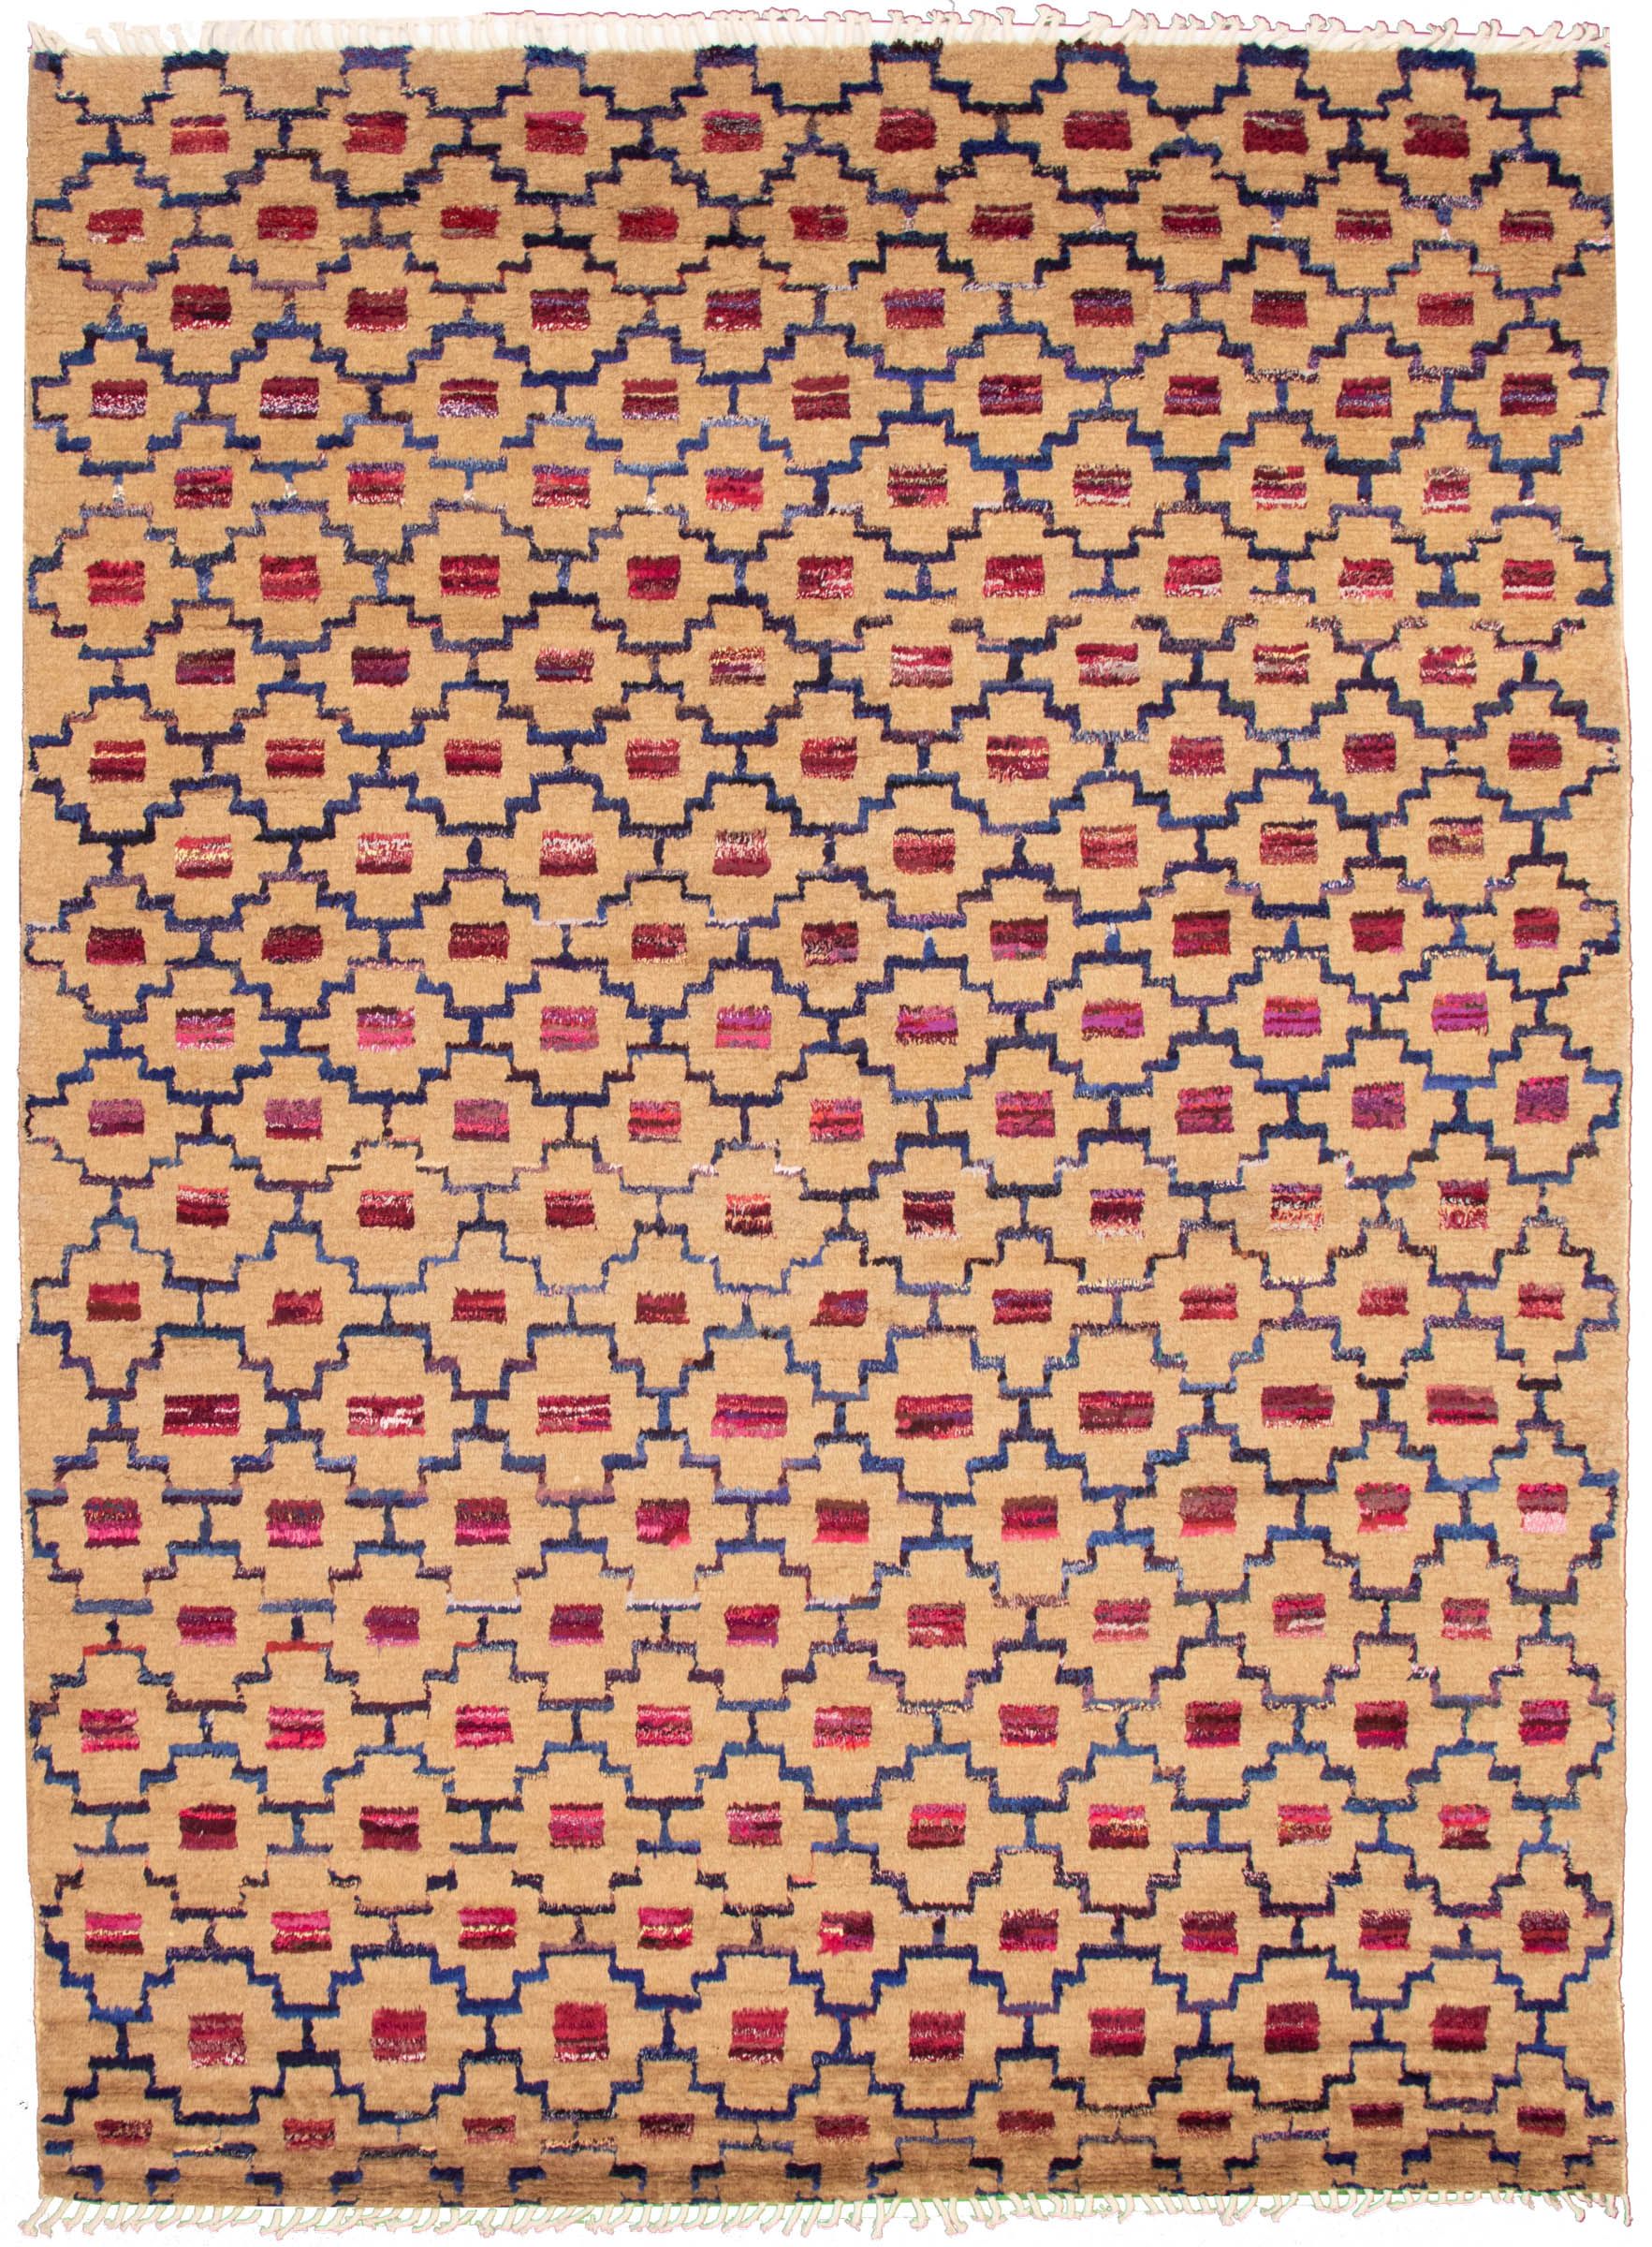 eCarpet Gallery Large Area Rug for Living Room Bedroom Hand-Knotted Wool Rug 339329 Pak Finest Marrakesh Moroccan Brown Rug 9'2 x 12'7 